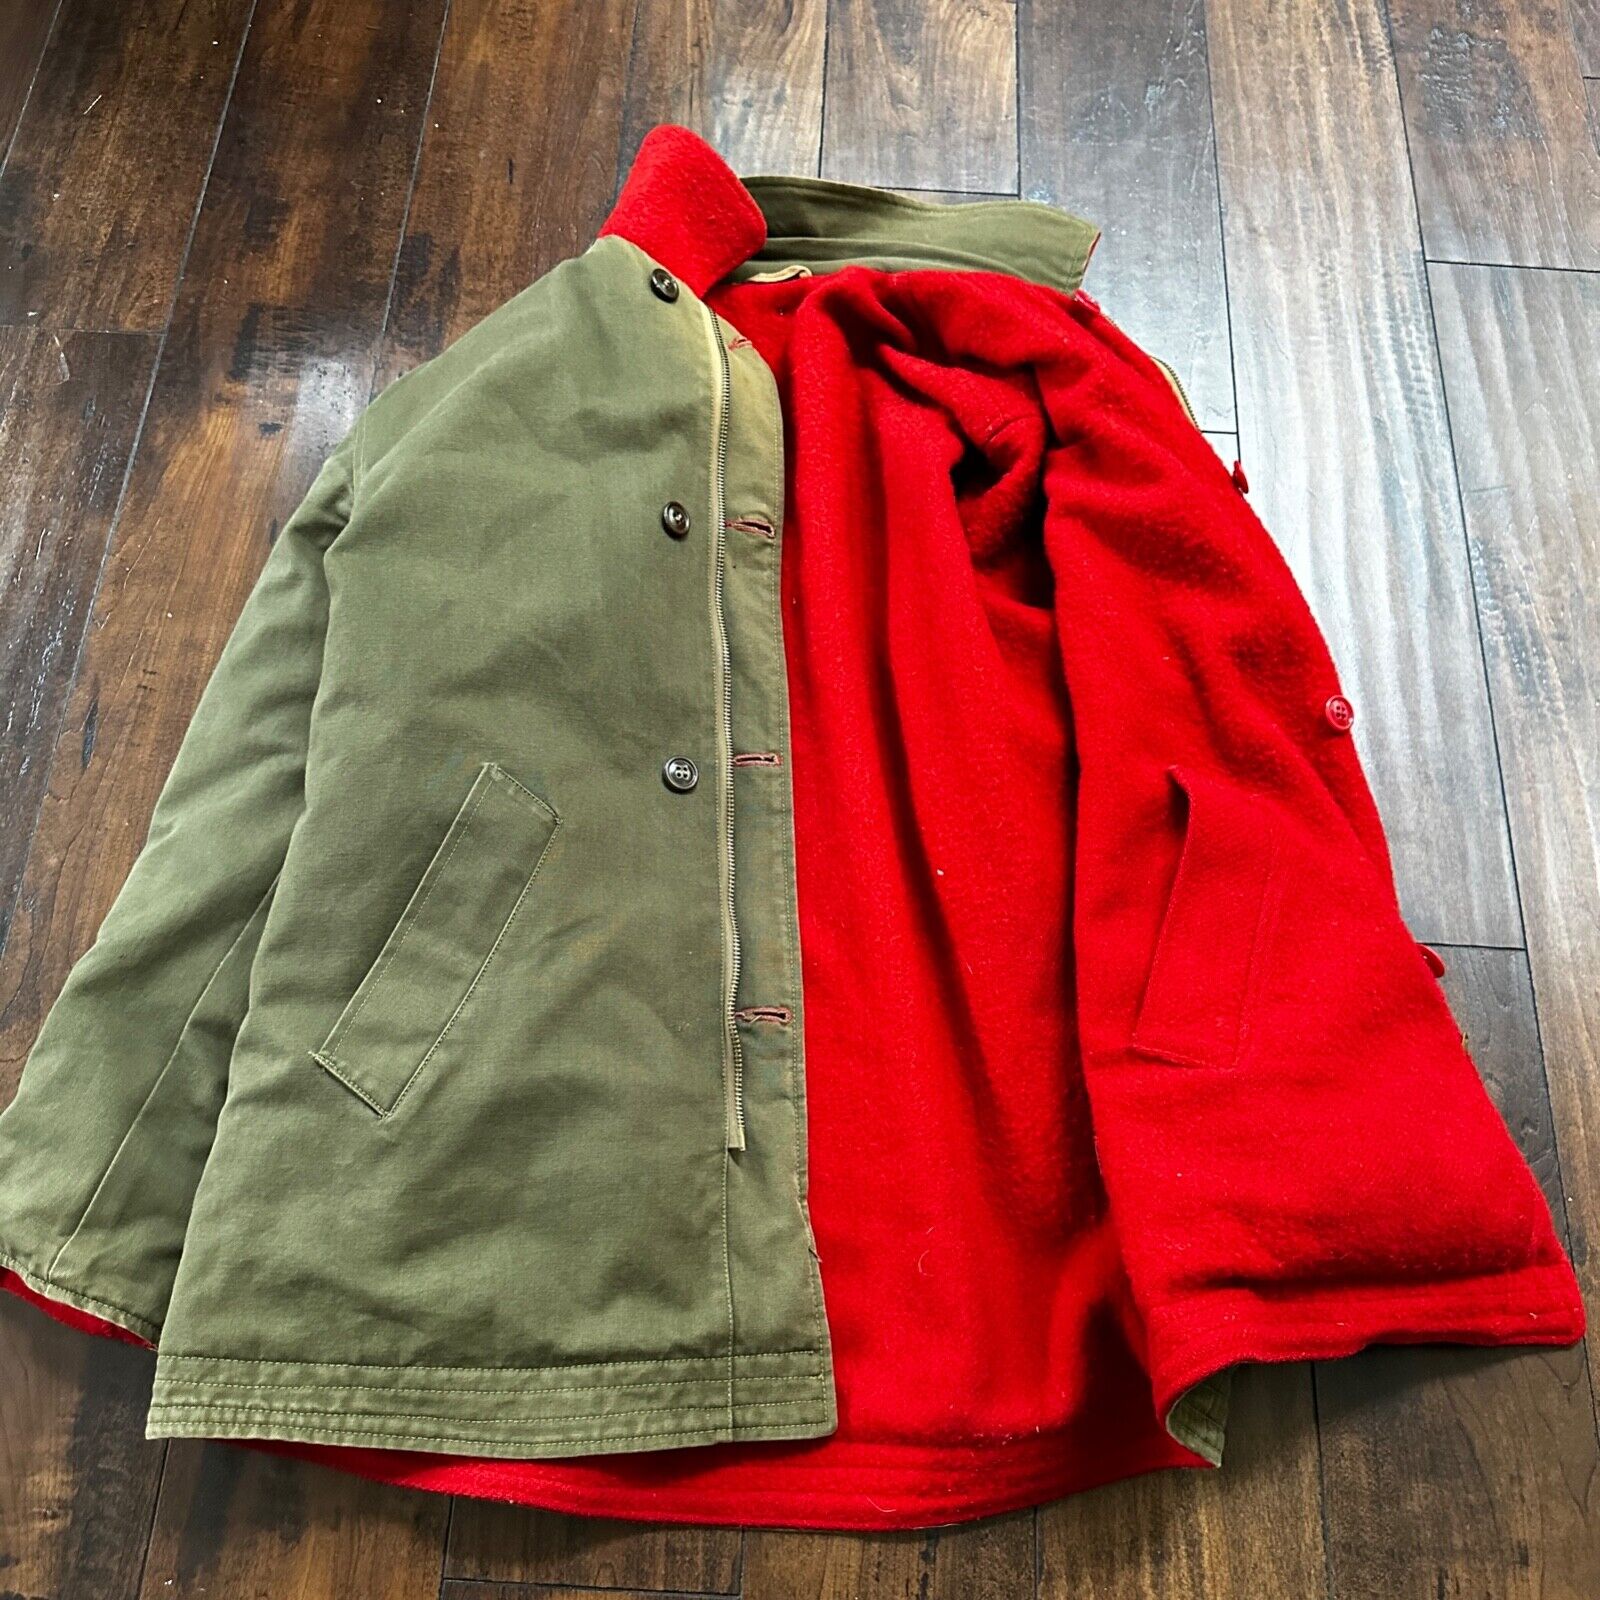 VTG 40s 50s Wool Western Coat Jacket Rockabilly Red Military Green WWII RARE